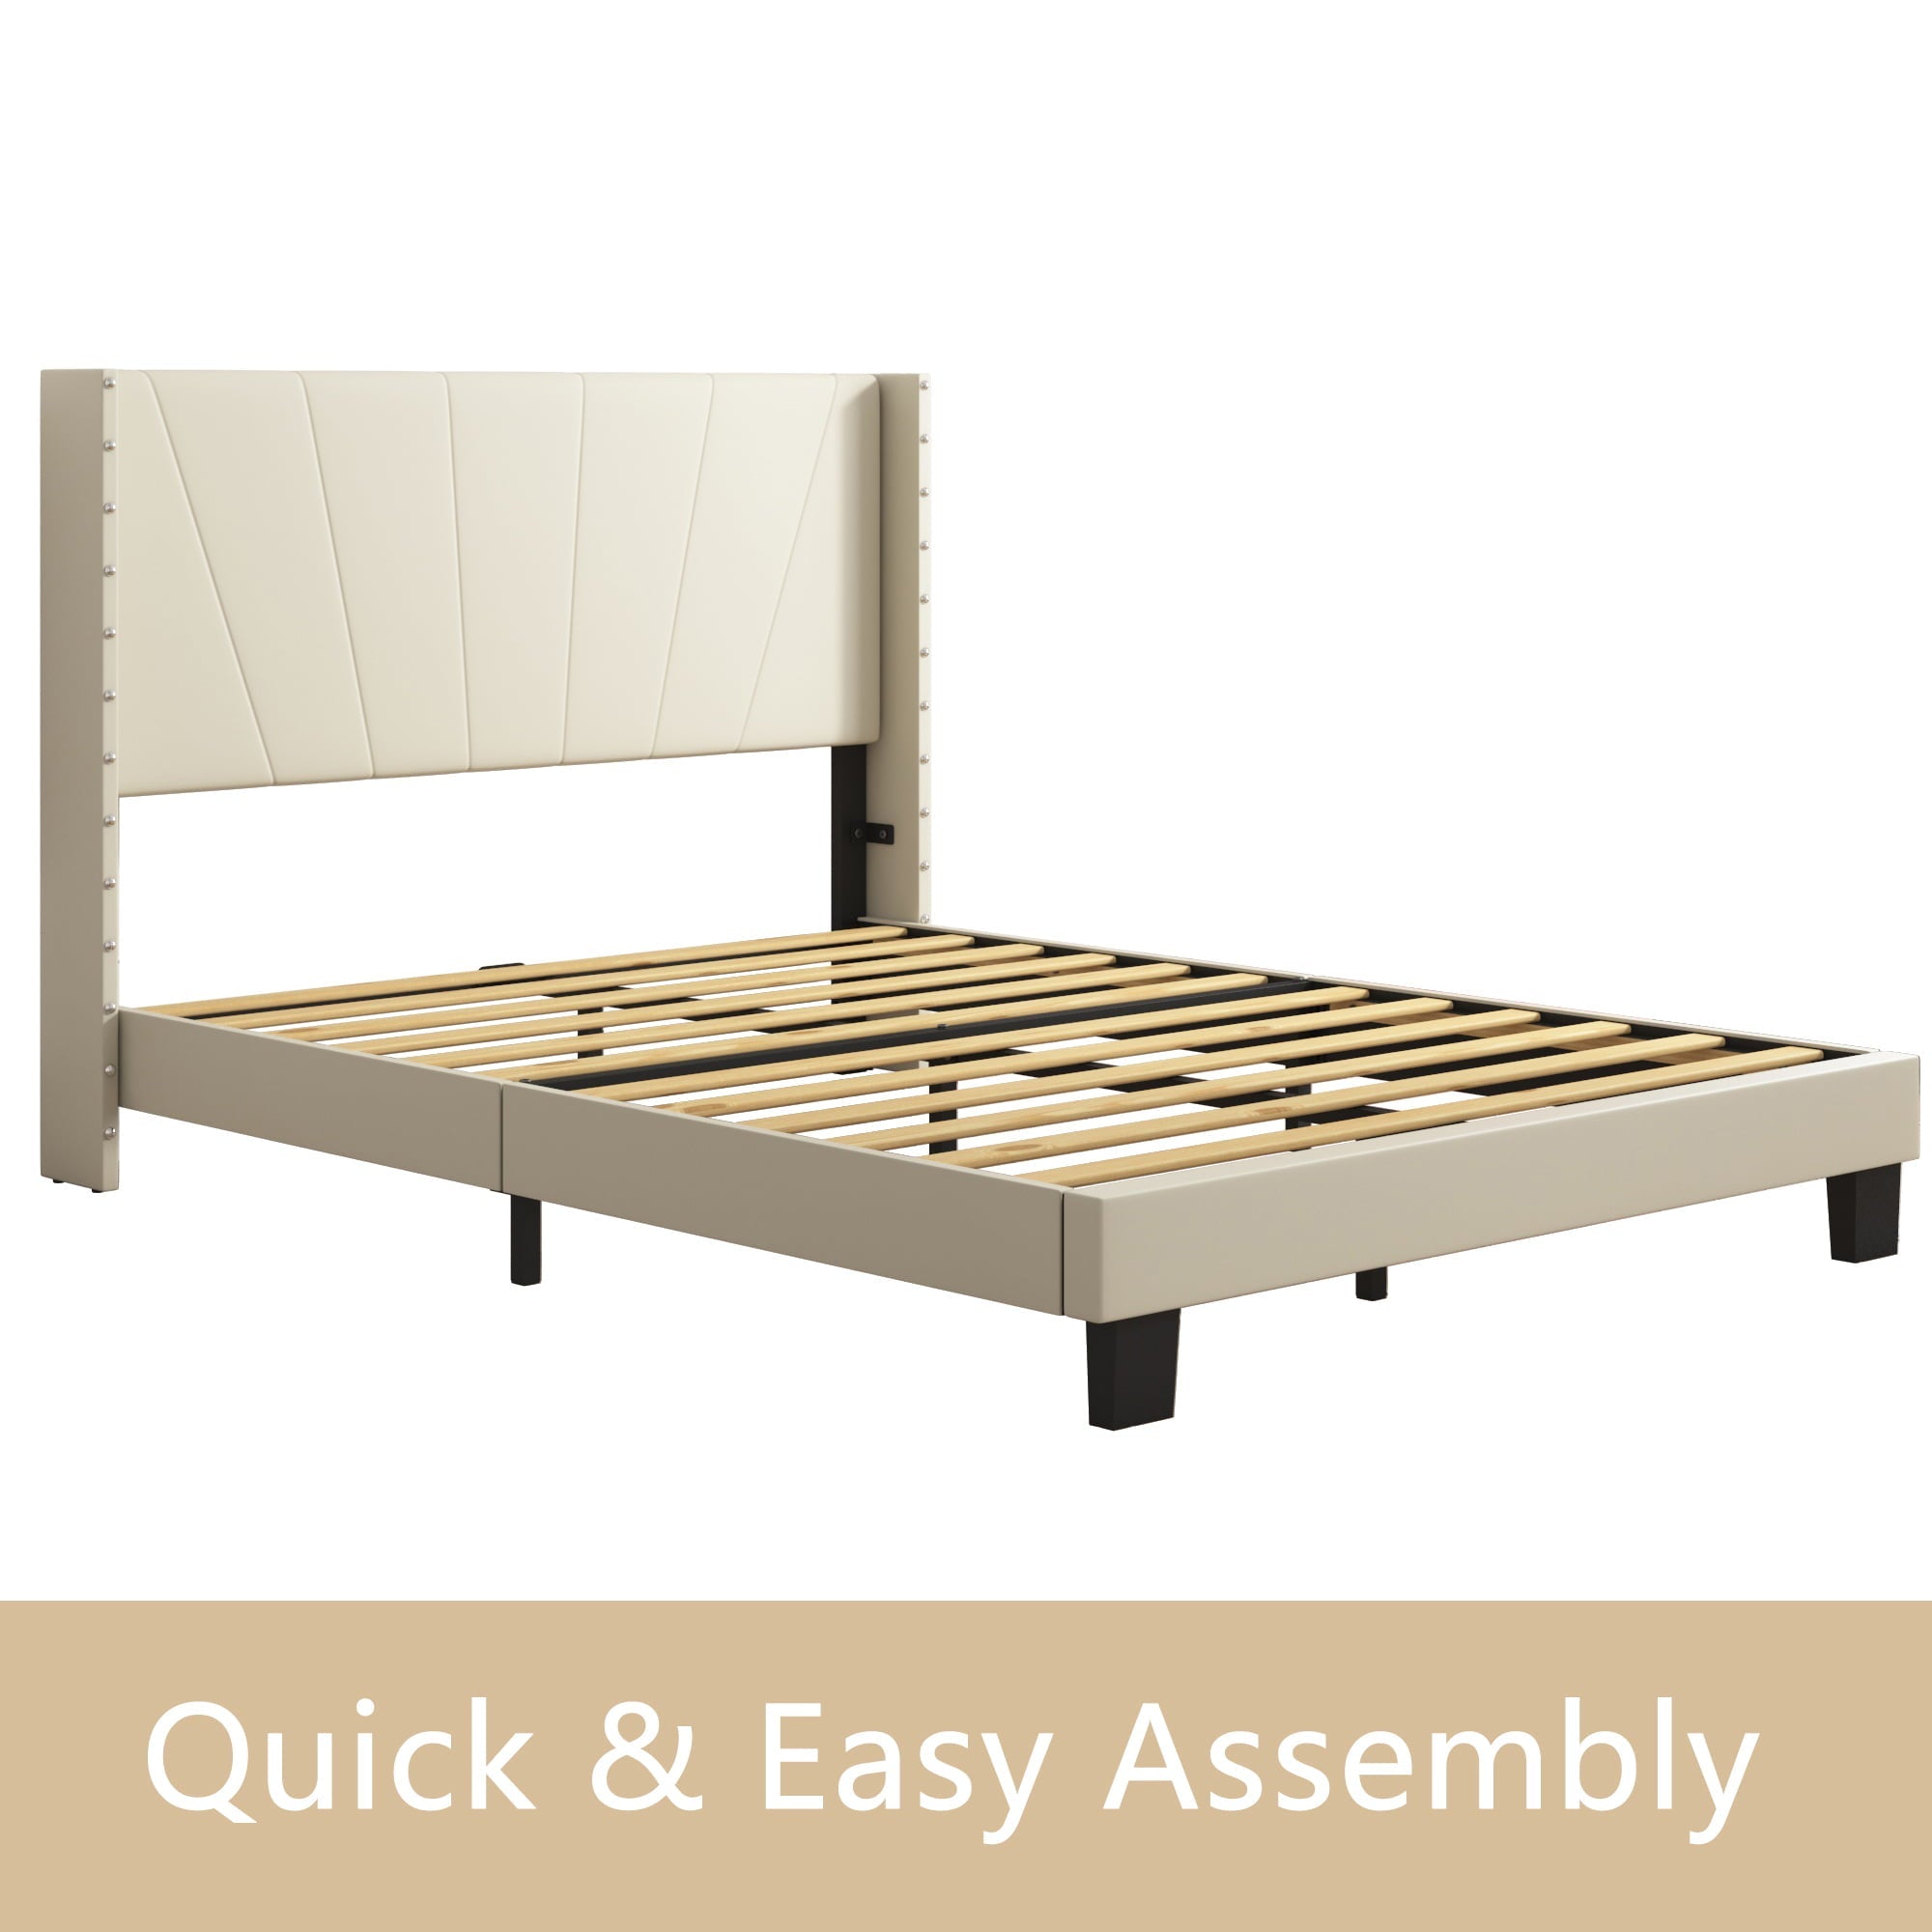 Beige Full Bed Frame for Adults Kids, Modern Fabric Upholstered Platform Bed Frame with Headboard, Full Size Bed Frame Bedroom Furniture with Wood Slats Support, No Box Spring Needed